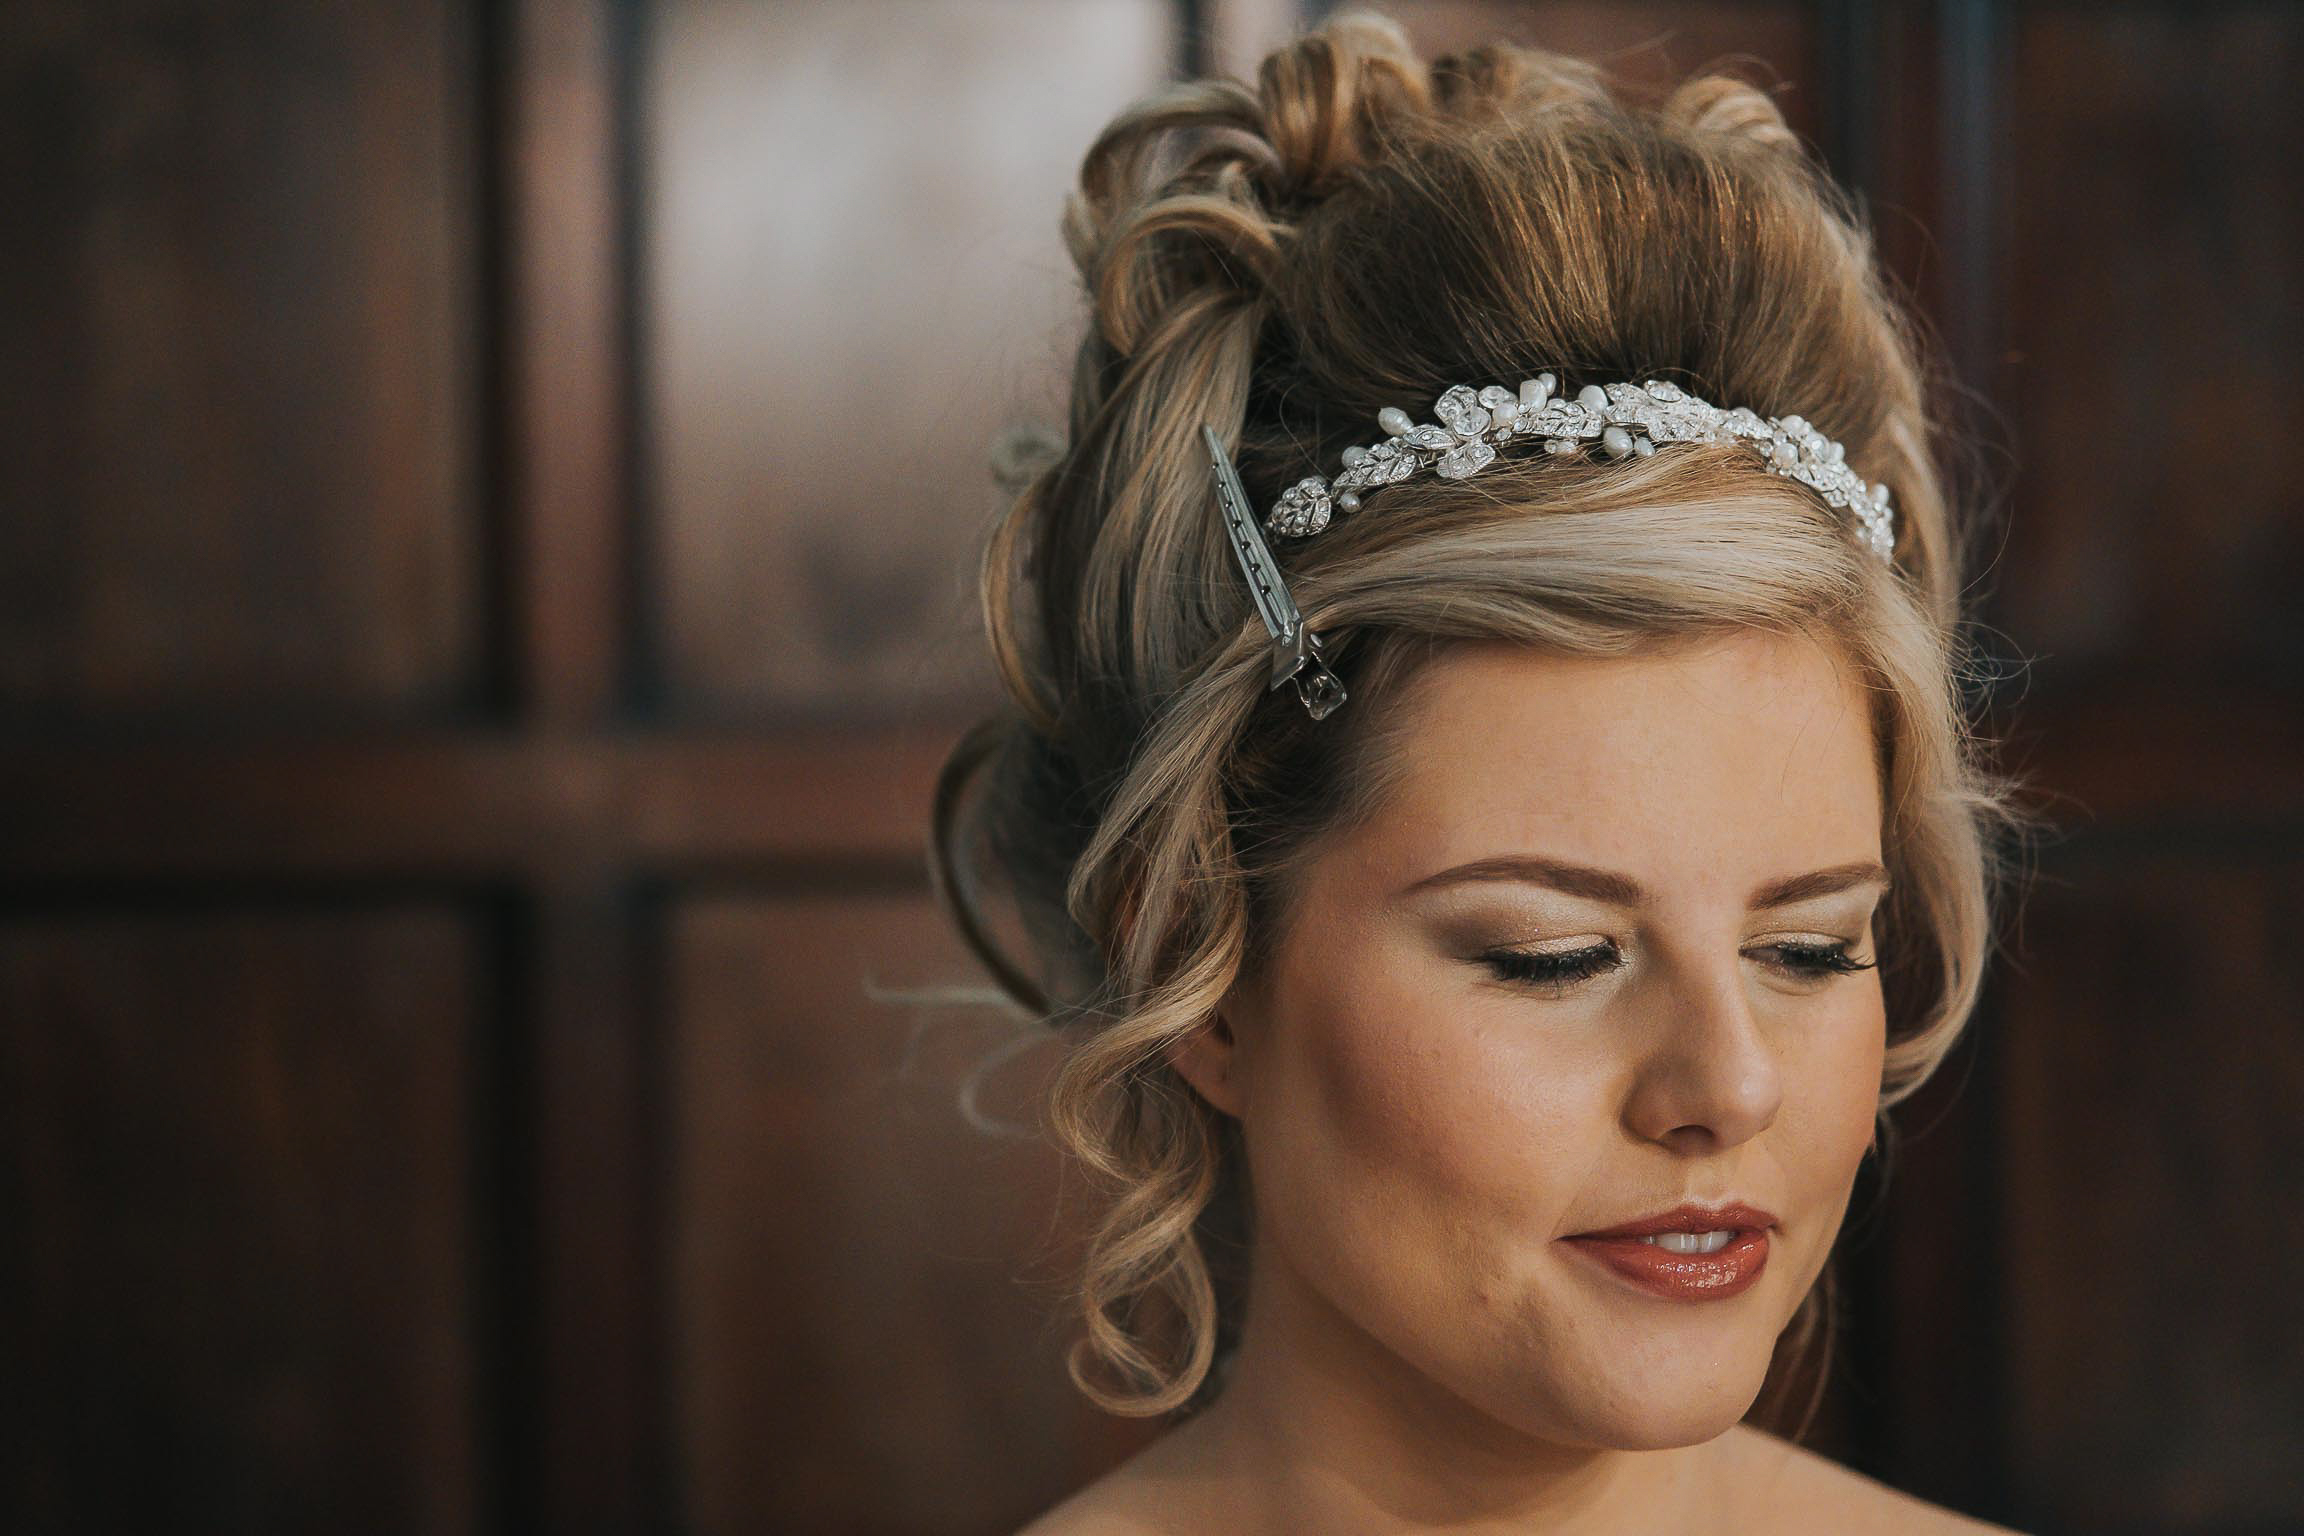 Shauna the bride during make up from Jeanette Flynn Make up Artist